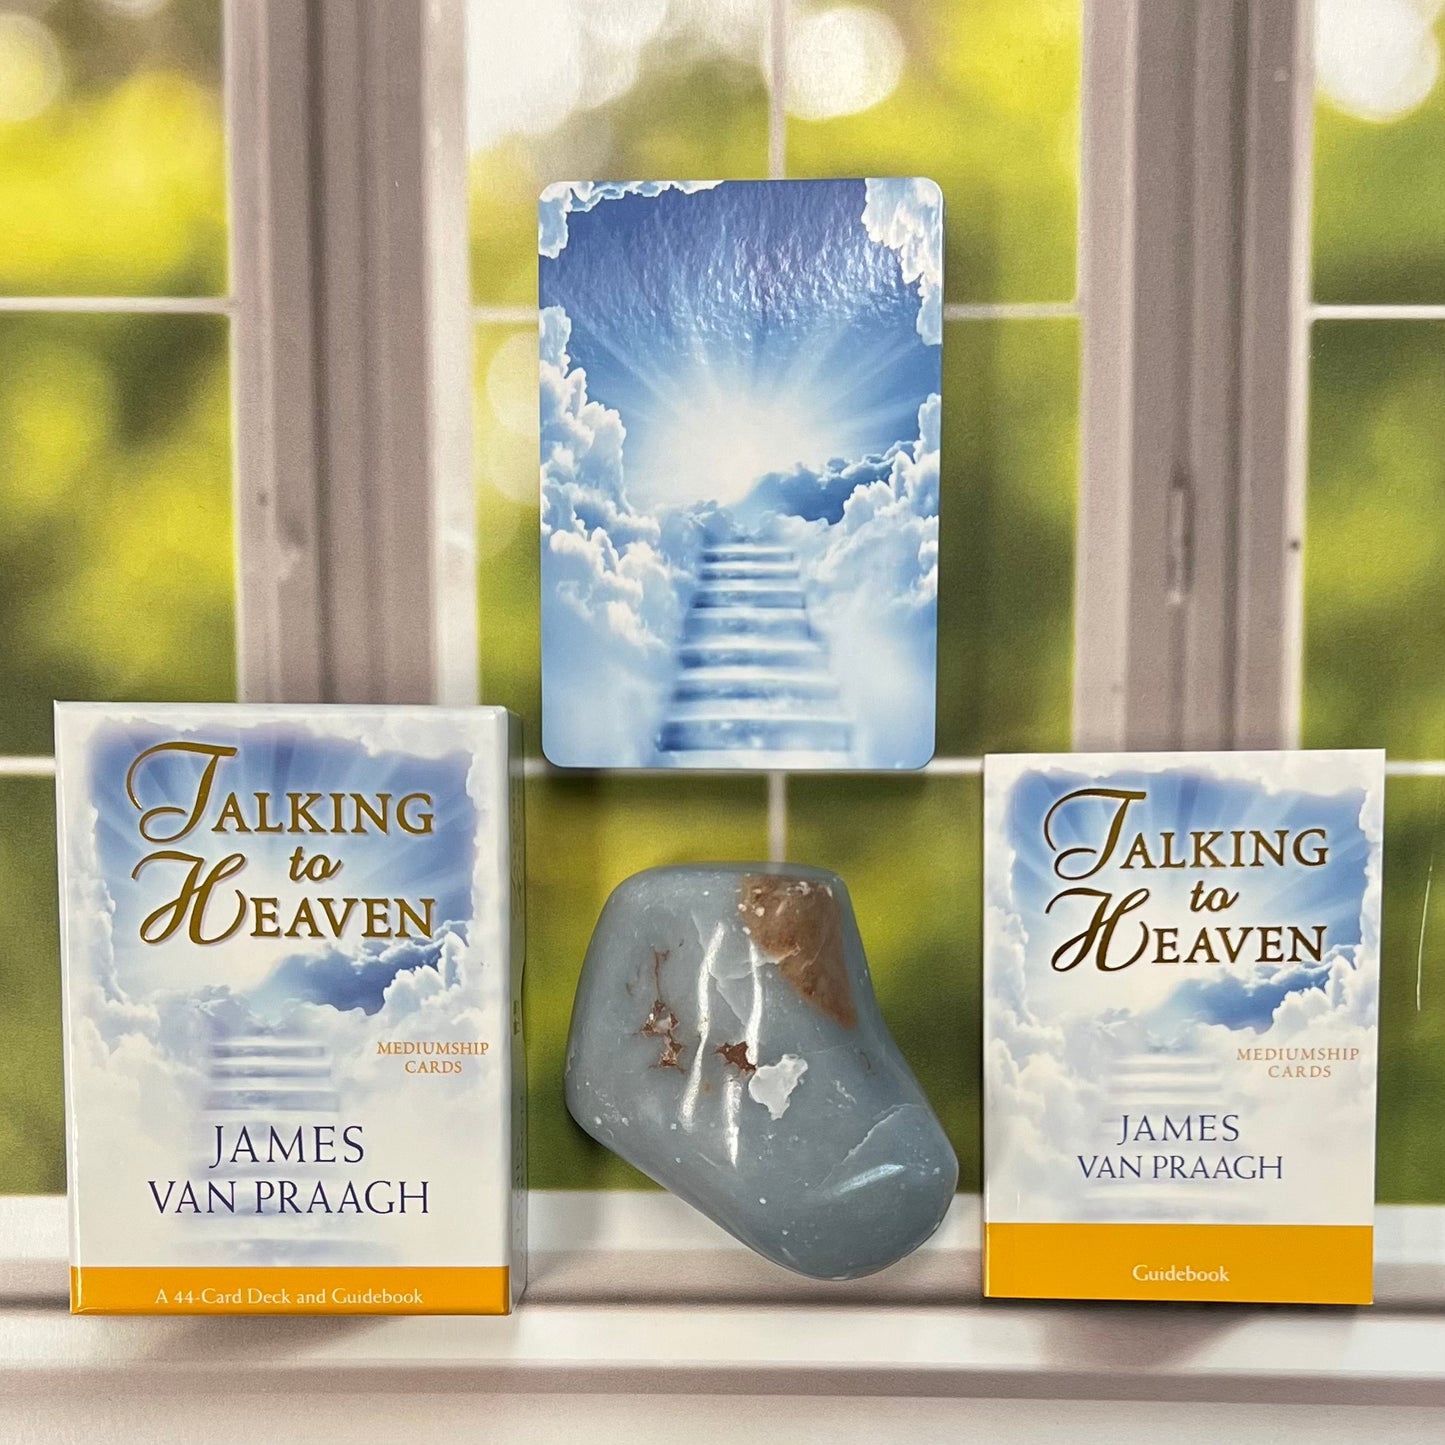 Talking to Heaven Mediumship Cards: A 44-Card Deck and Guidebook by James Van Praagh